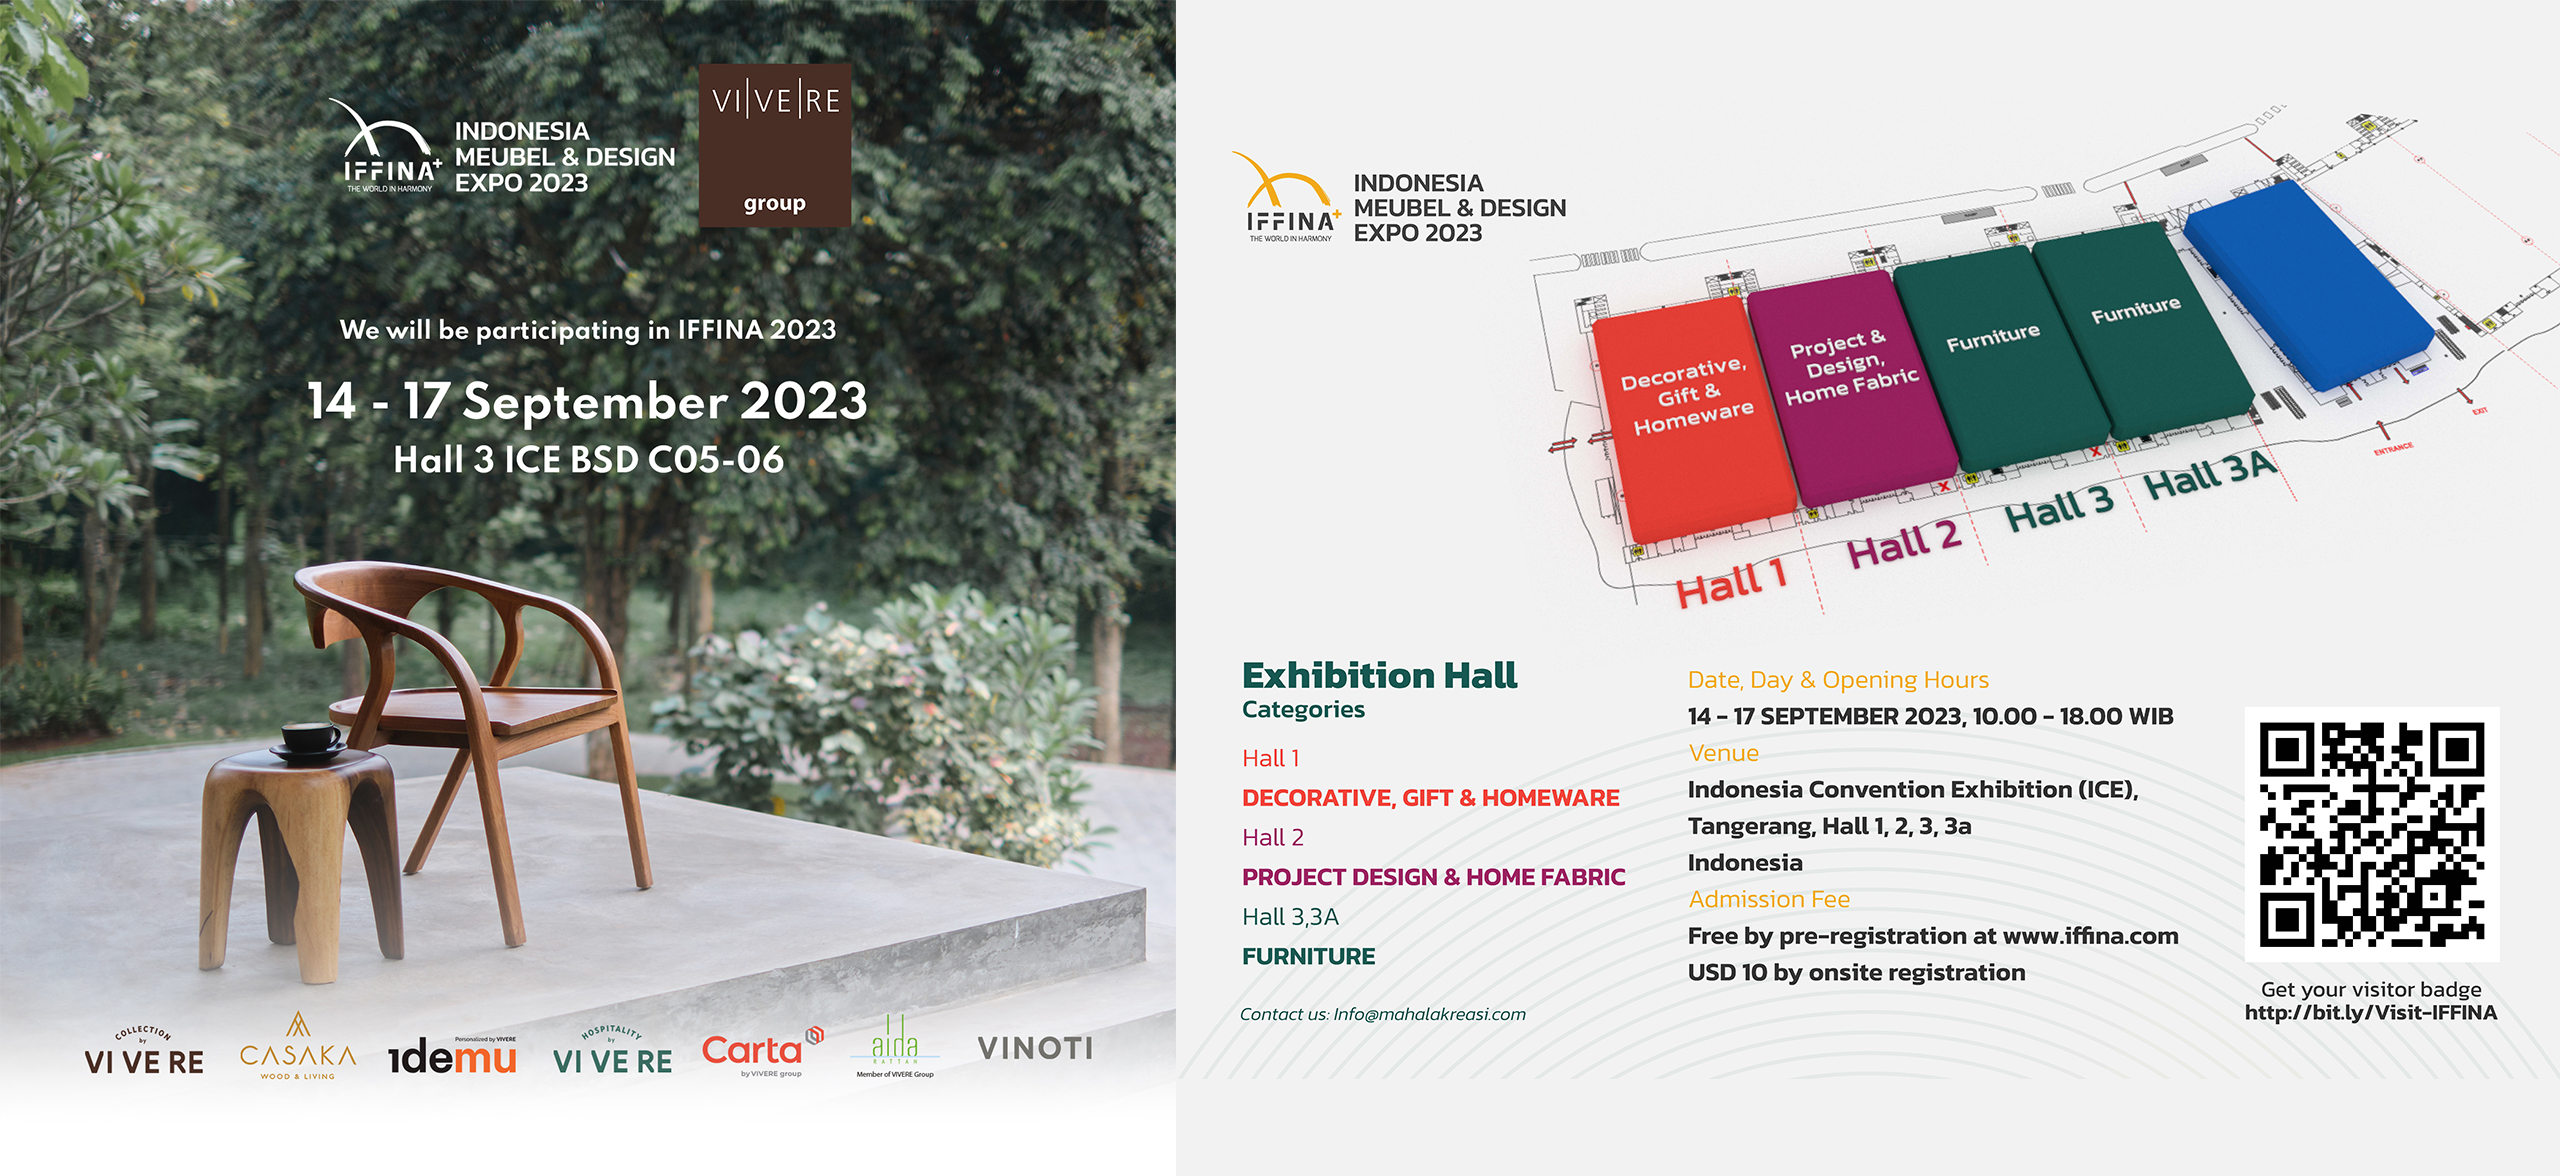 Join us in the IFFINA 2023 – Indonesia Meubel & Design Expo 2023 Banner